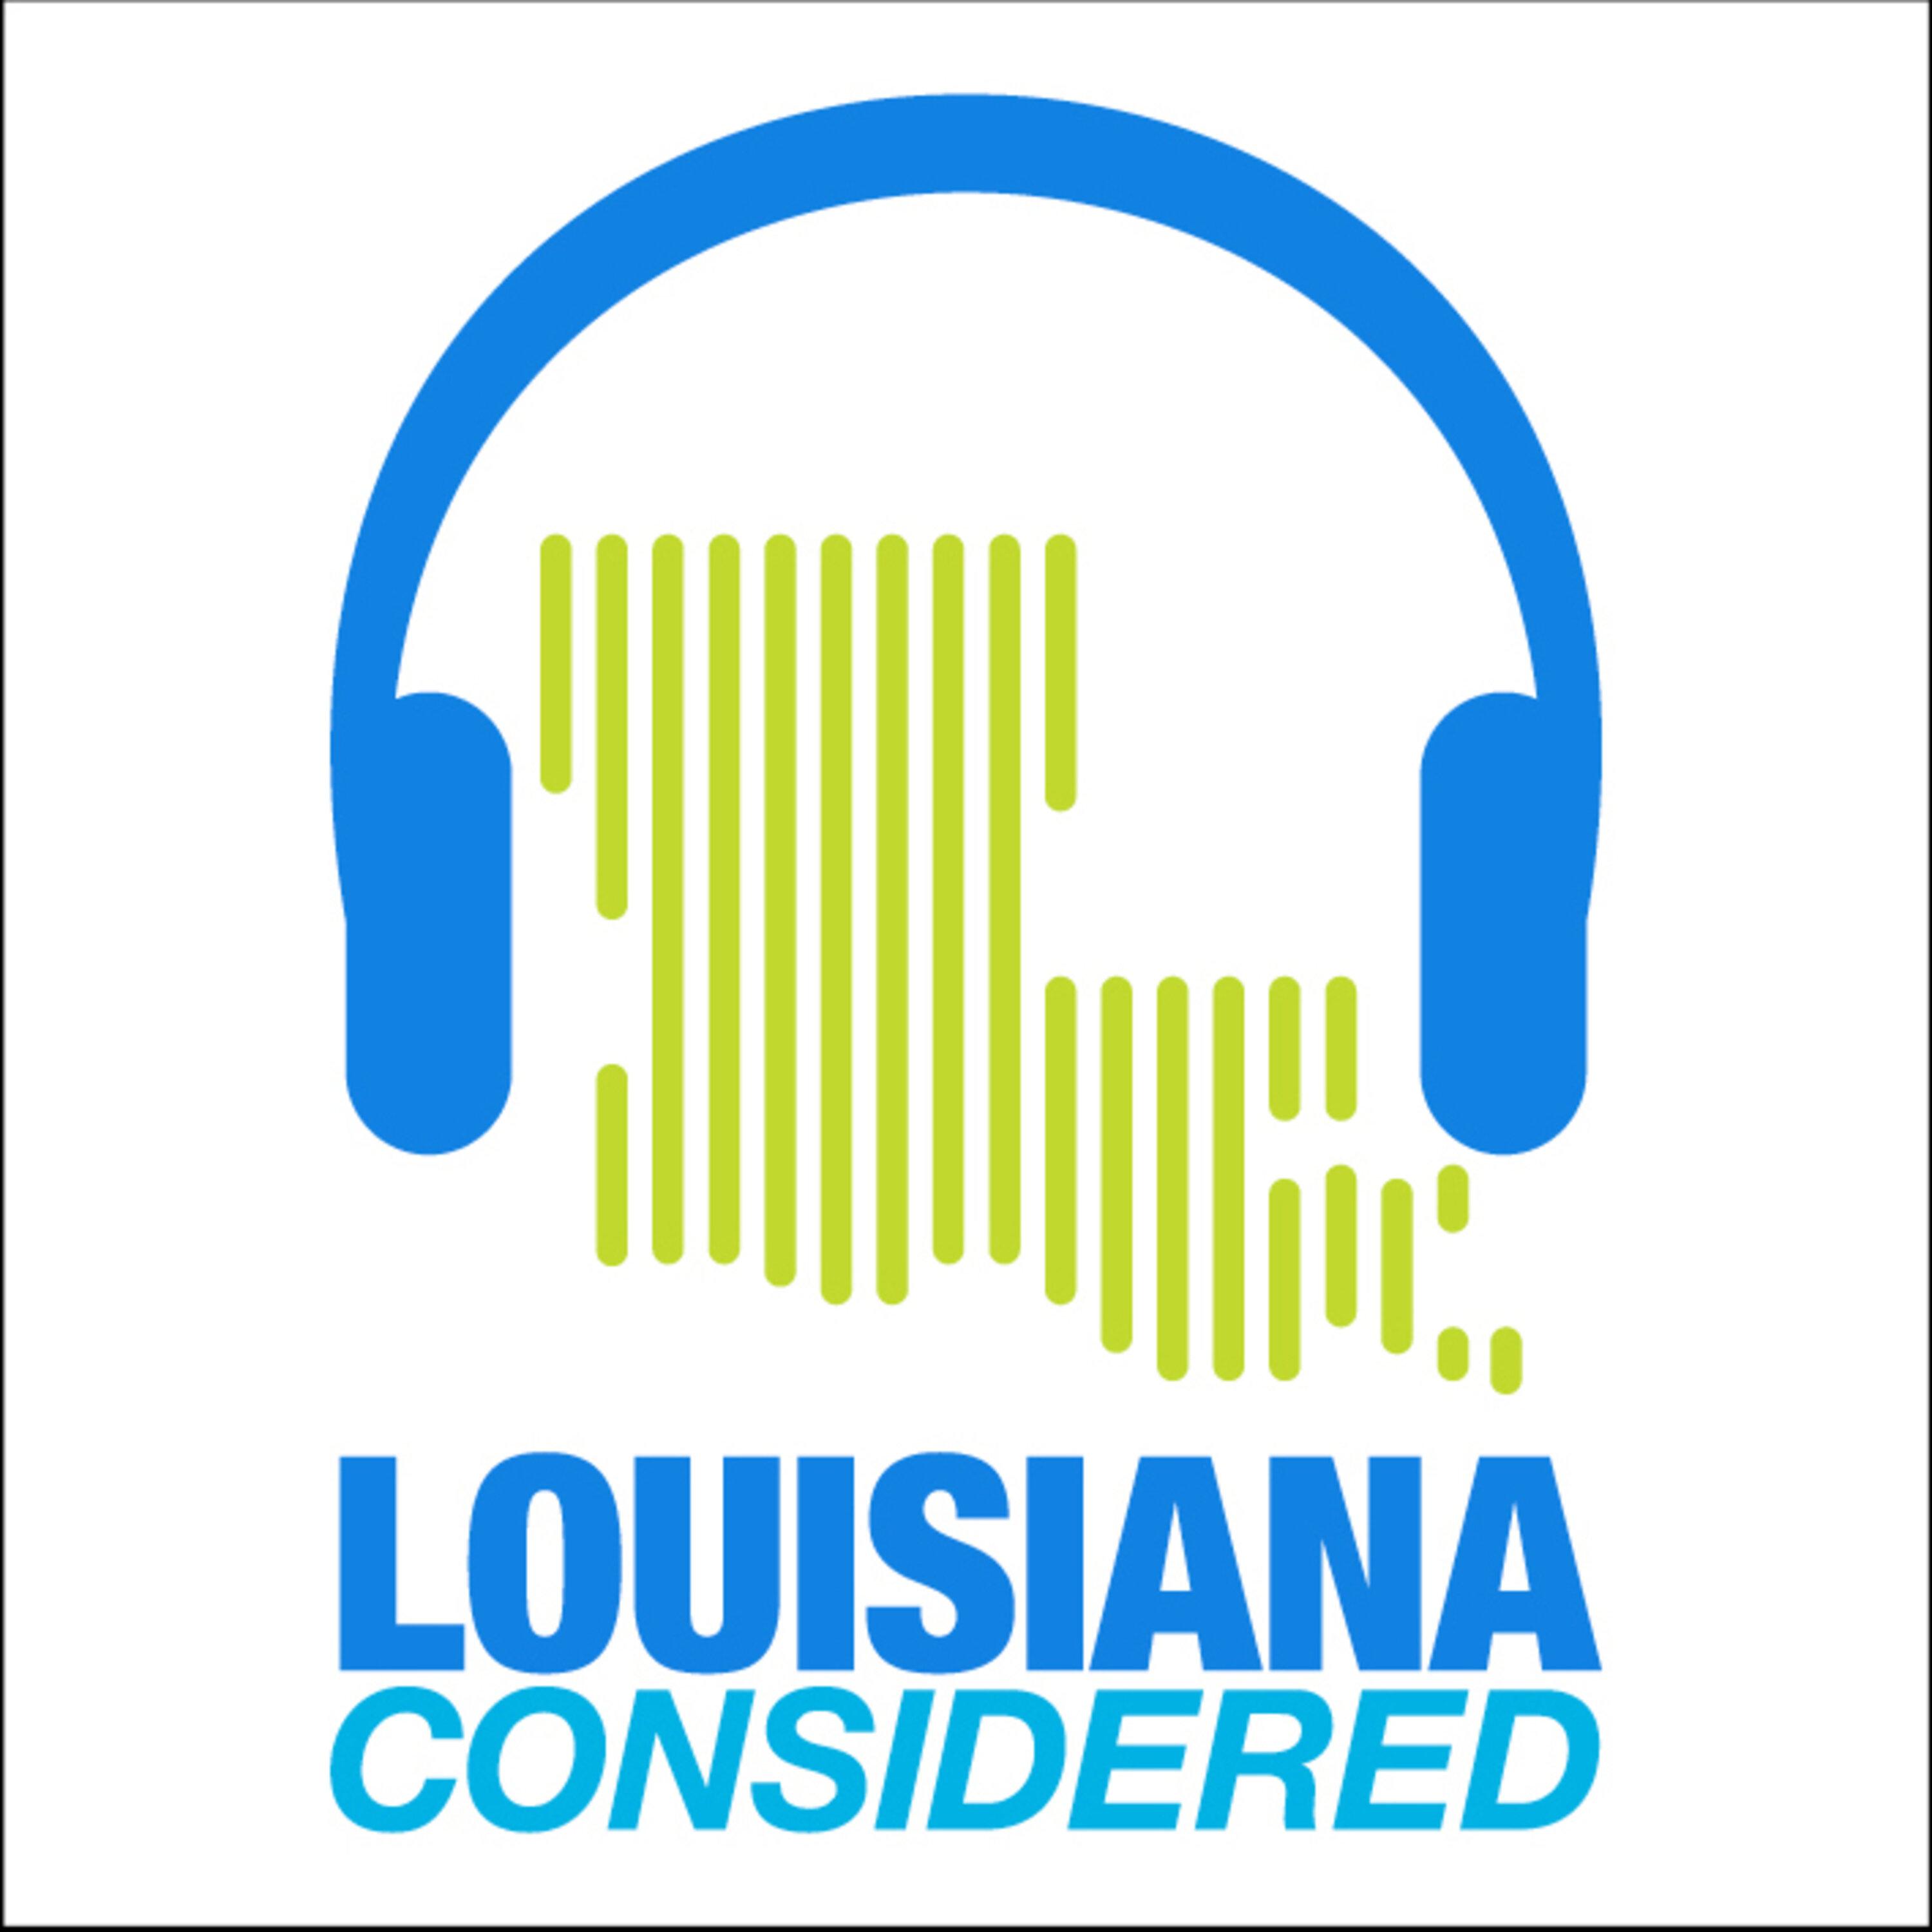 Thumbnail for "Louisiana Considered: HUD Sells Houses In Flood Zones, Bayou Communities Face Long Recovery From Ida, Influx Of Surrendered Pets In Southern Animal Shelters".